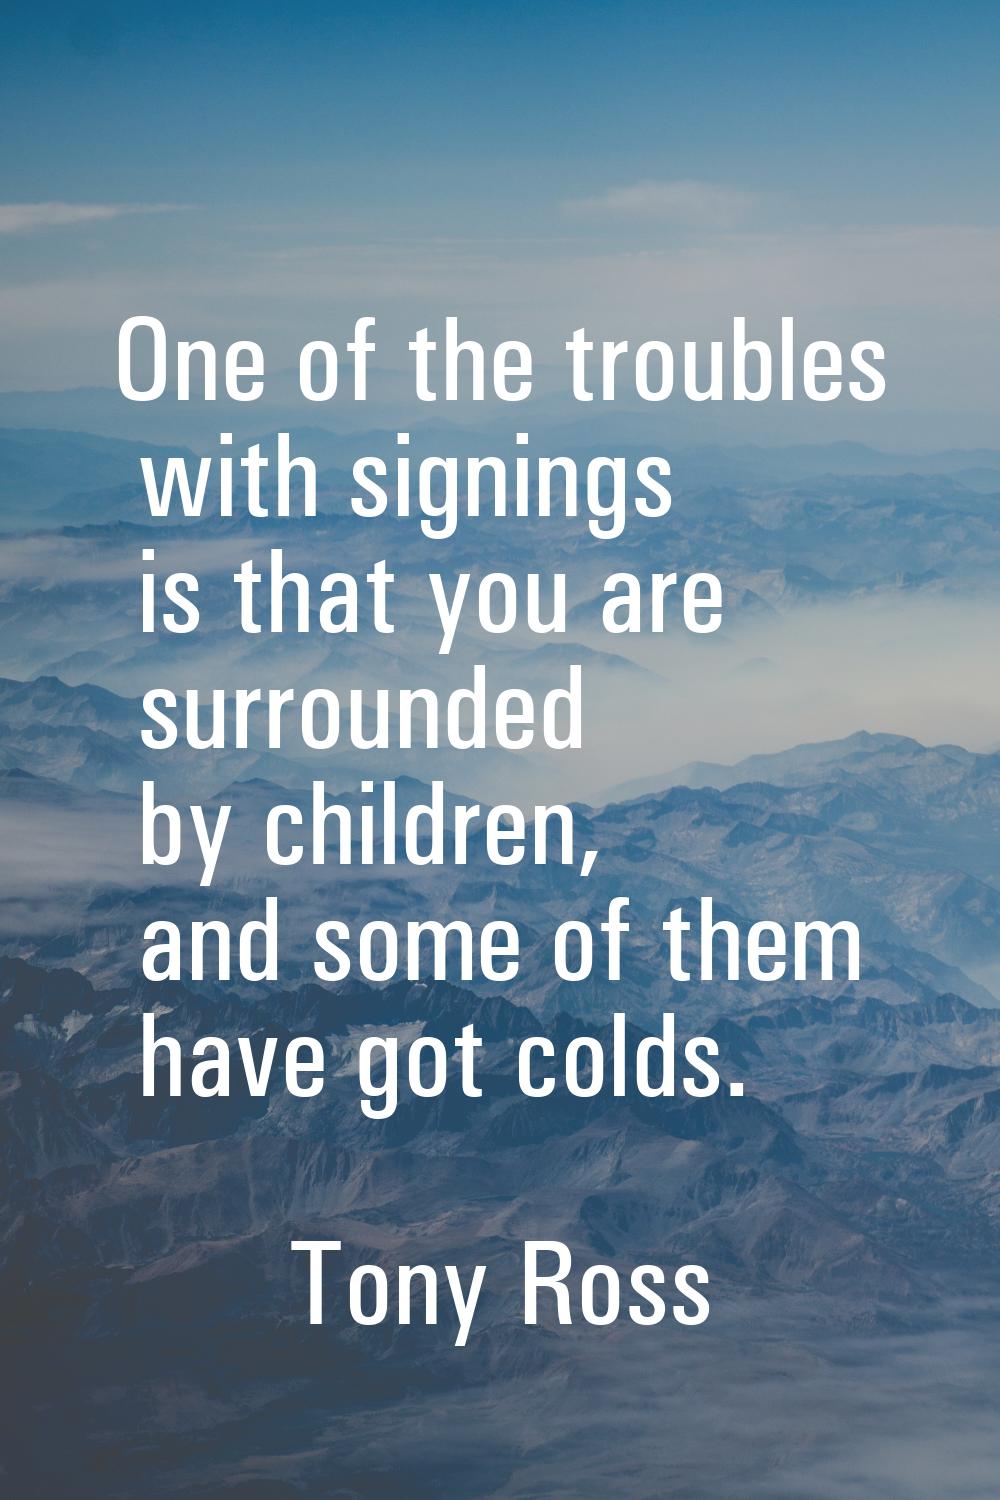 One of the troubles with signings is that you are surrounded by children, and some of them have got